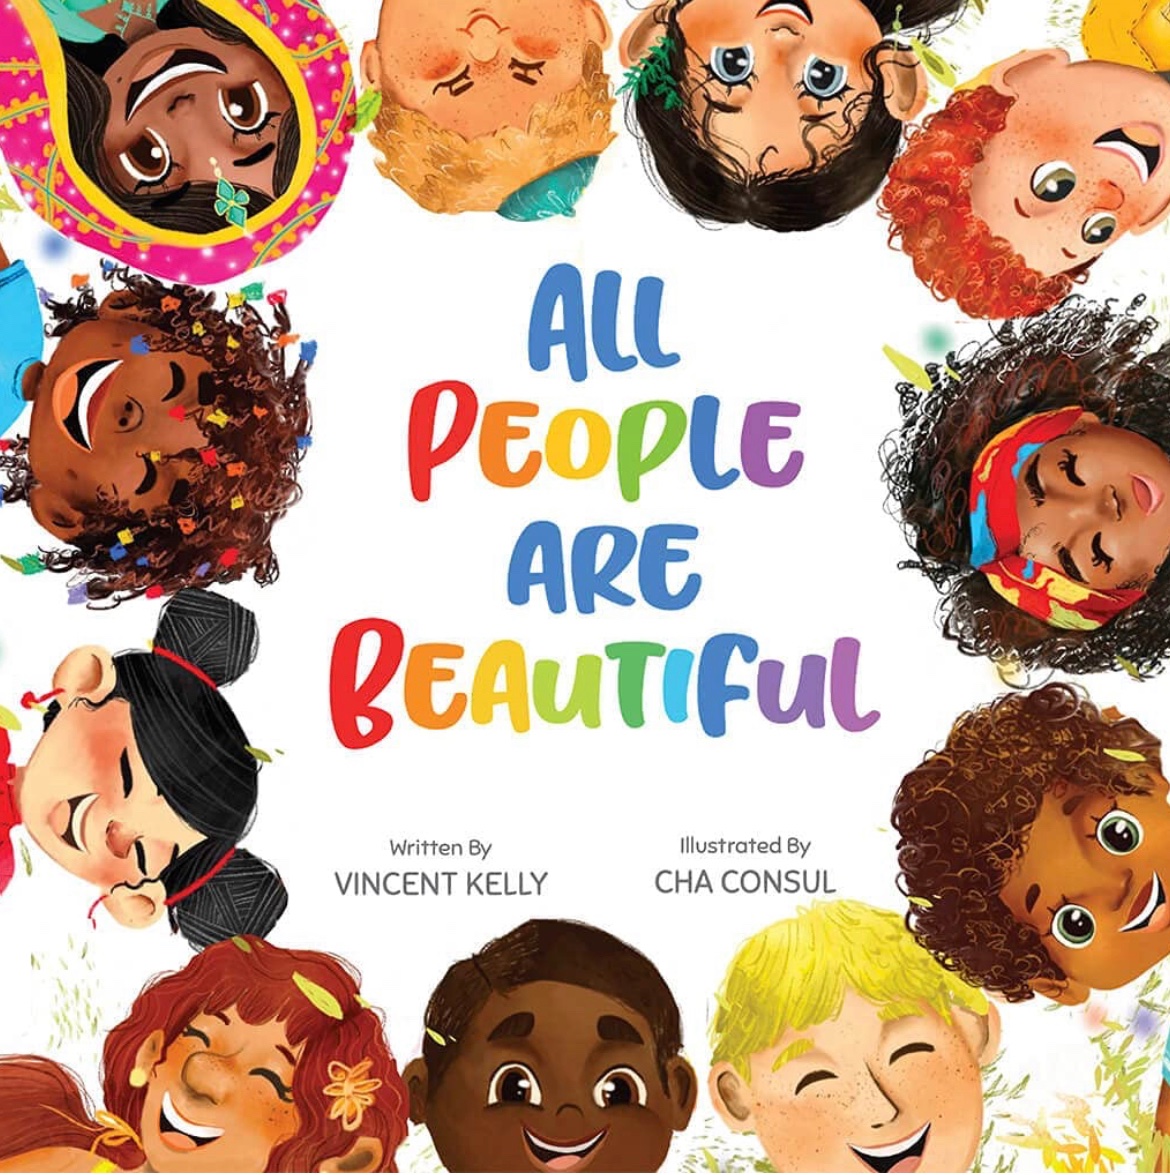 The caption says it best….we truly are ALL BEAUTIFUL ❤️
#LBtogetherwecan 
@lbpsbilingual